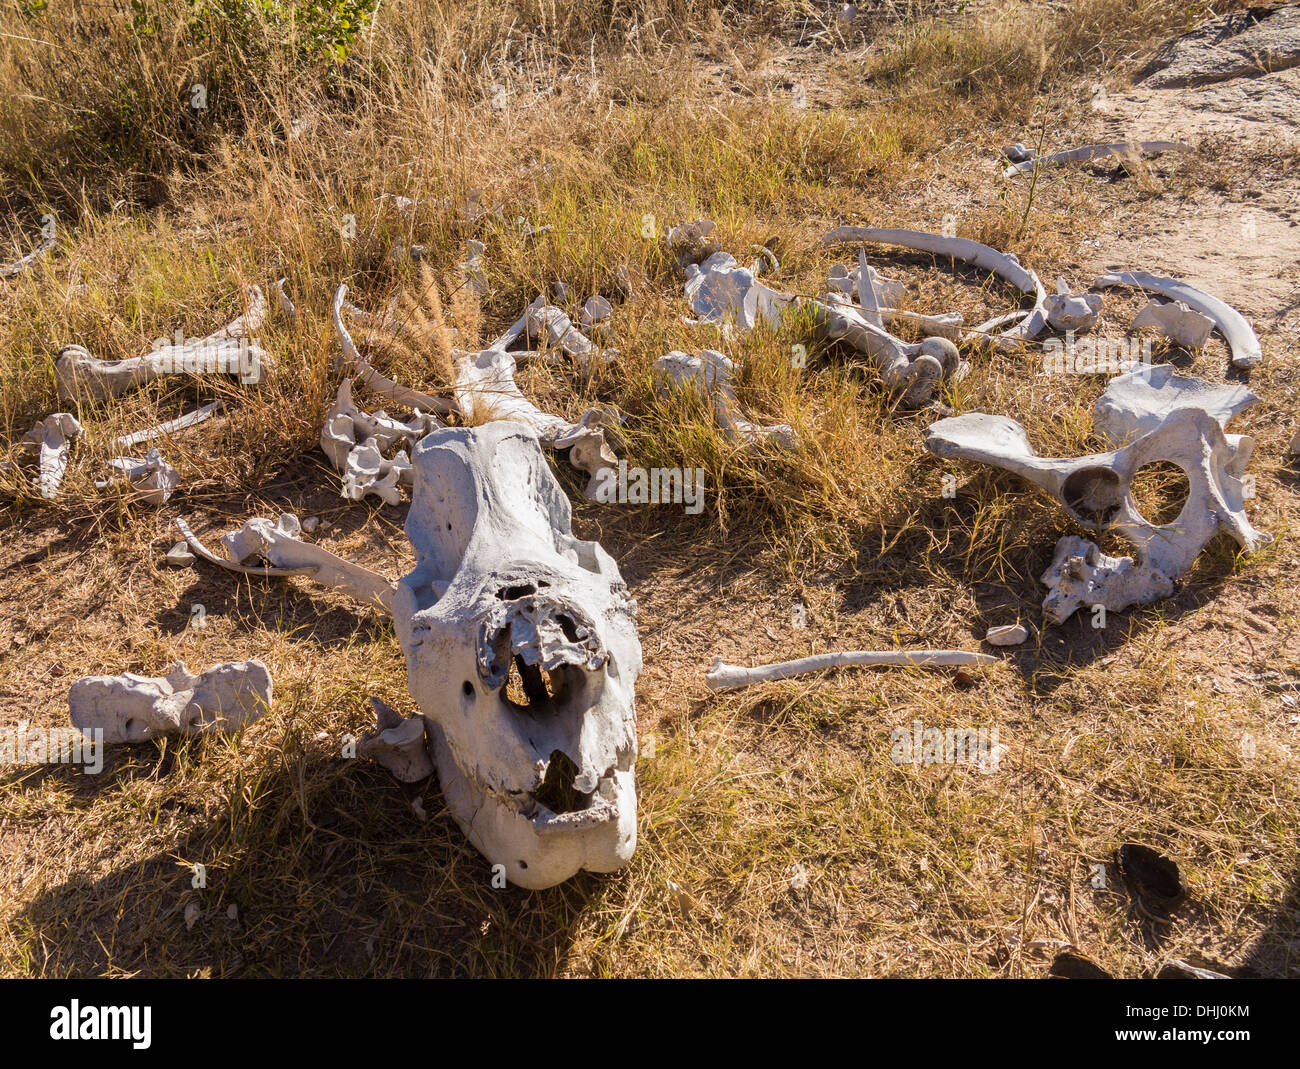 Skull and bones of a rhino likely killed for its horn in poaching in Matobo National Park, Zimbabwe, Africa Stock Photo